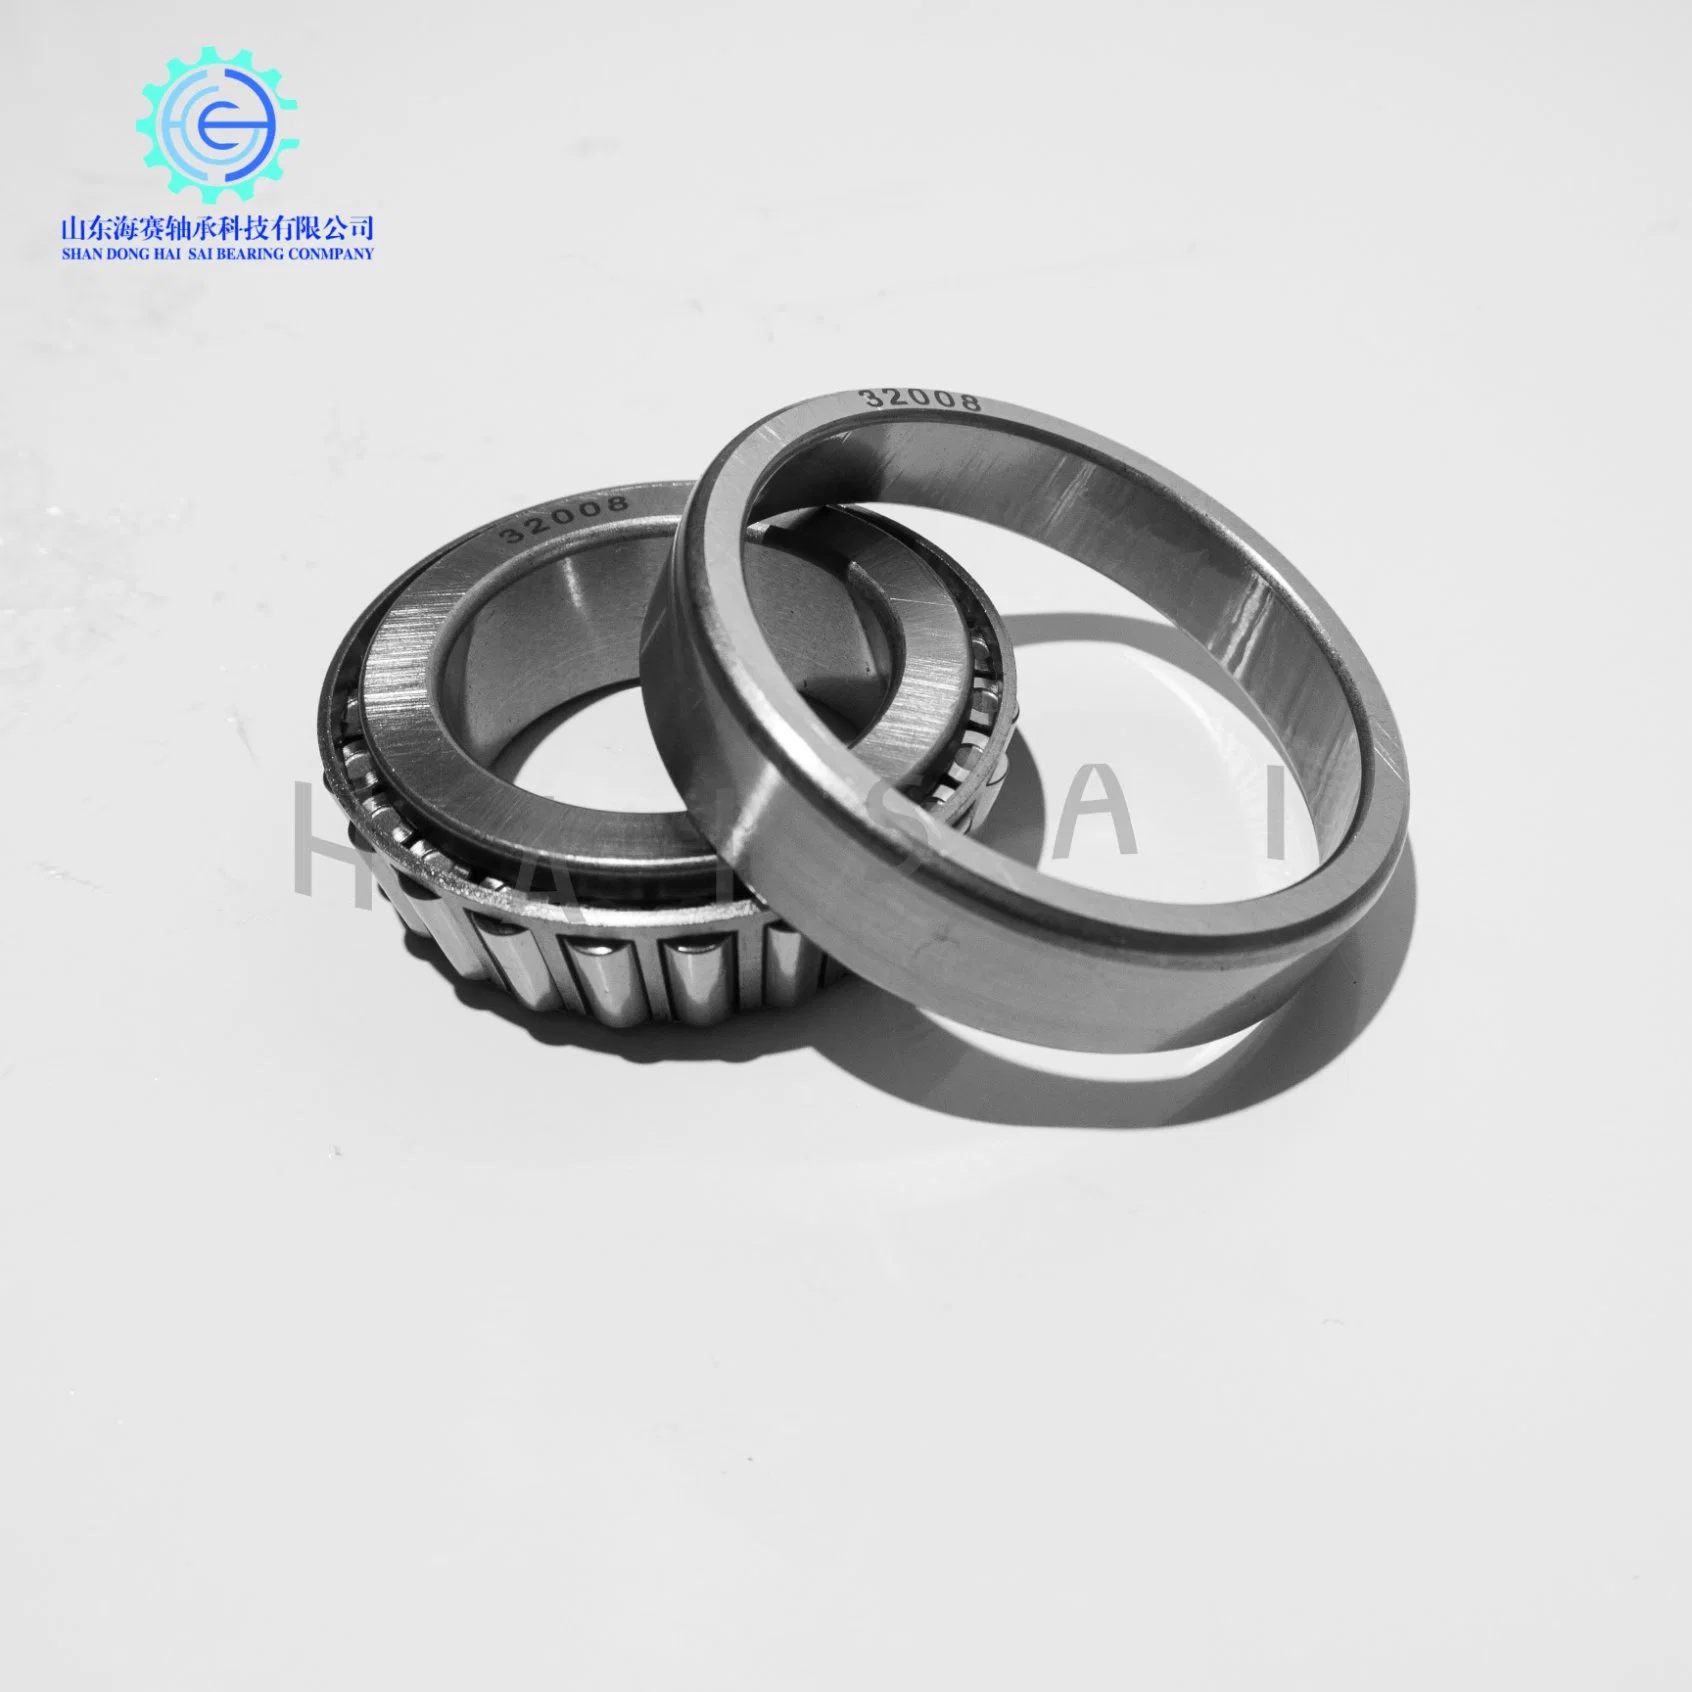 1688 Factory Outlet 32206/30207/32207/32008/32218 Tapered/Cylindrical Roller/Thrust Ball/Needle/Stainless Steel Bearing with High quality/High cost performance and Long Life